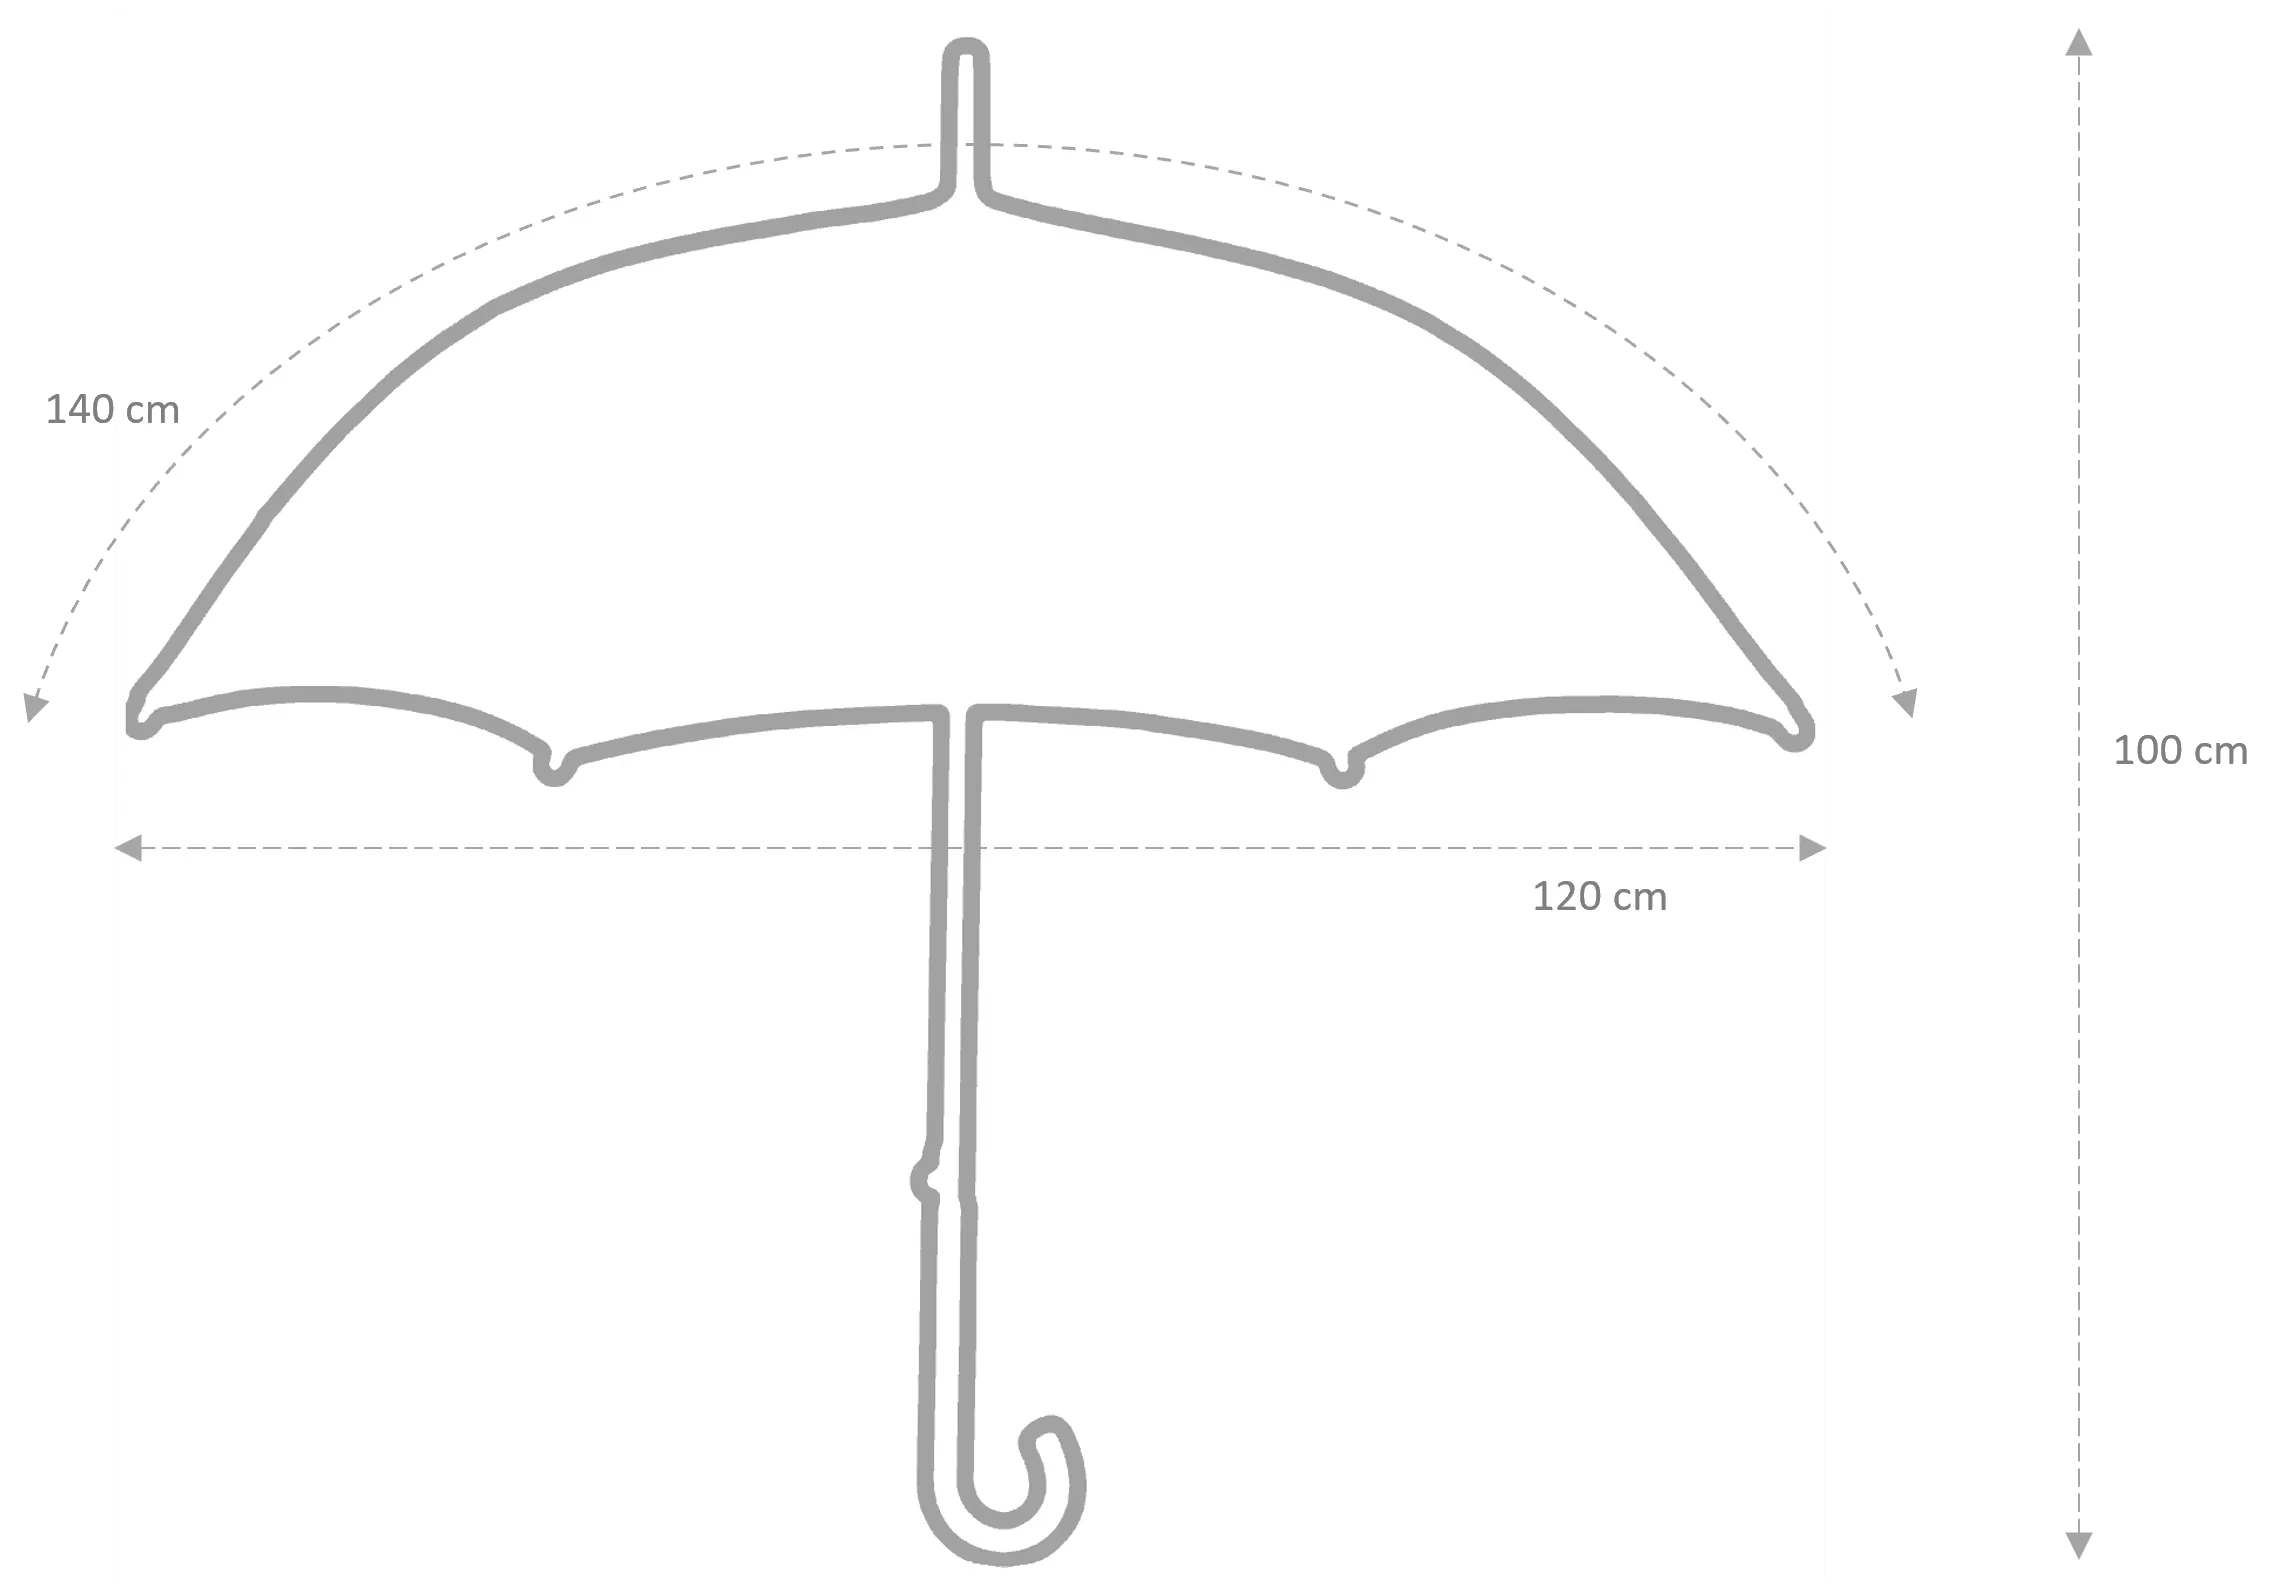 hidewise-london-umbrella-wooden-J-handle-strong-premium-quality-brolly-lilac-gust-proof-automatic-straight-golf-size-professional-elegant-sturdy-wind-proof-canopy-size-large